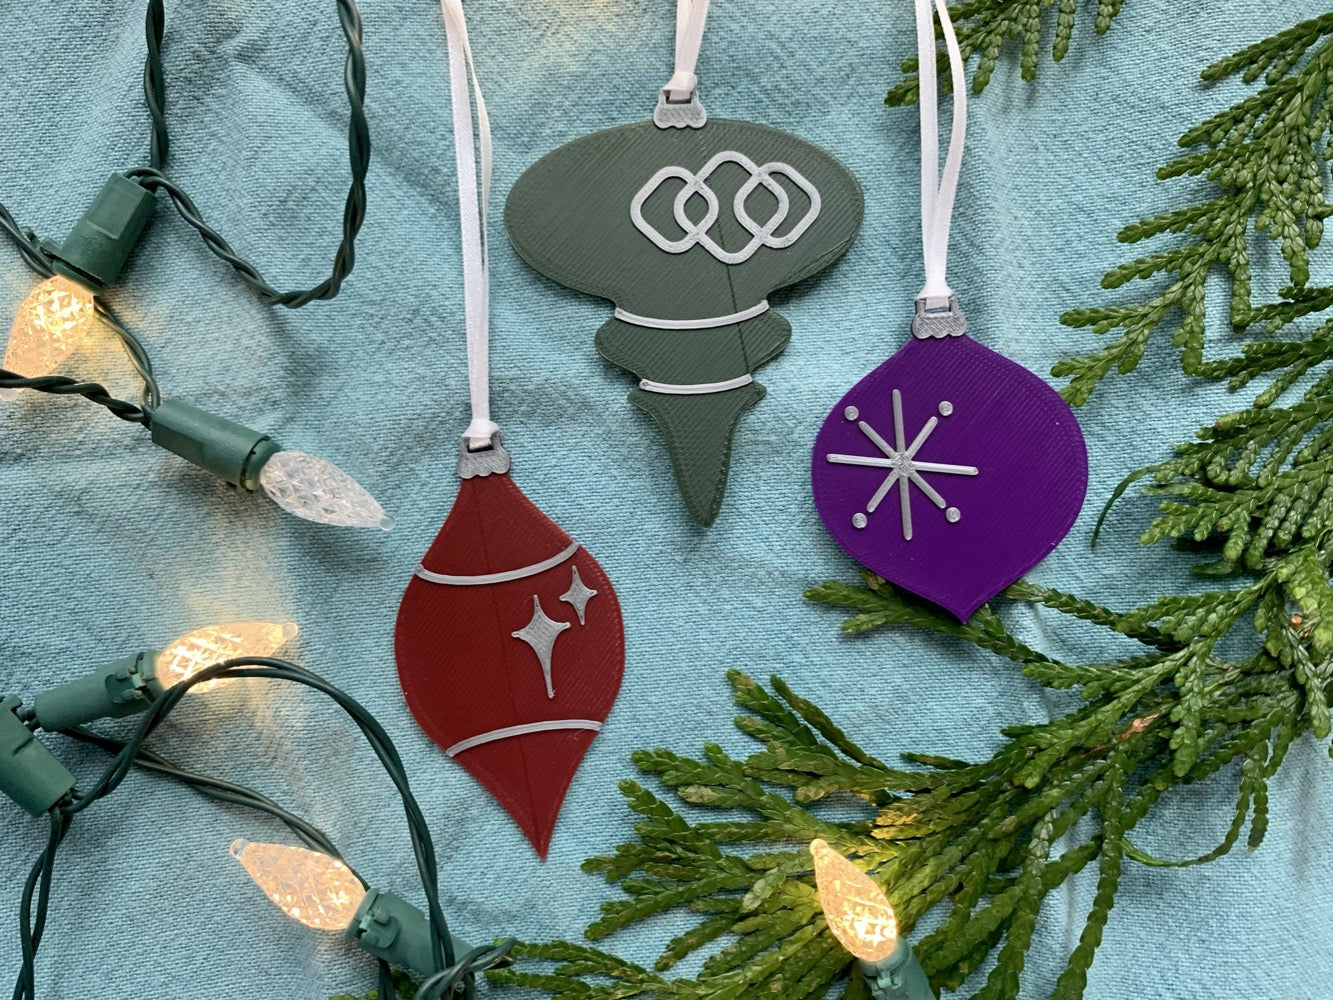 On a bright blue background with evergreen branches and a string of lights are a set of 3 R+D 3D printed ornaments. They are all designed to look like vintage baubles that would have commonly been found on Christmas trees in the past. They each have silver accents of stars and shapes. One is merlot red, one is dark green, and one is purple.